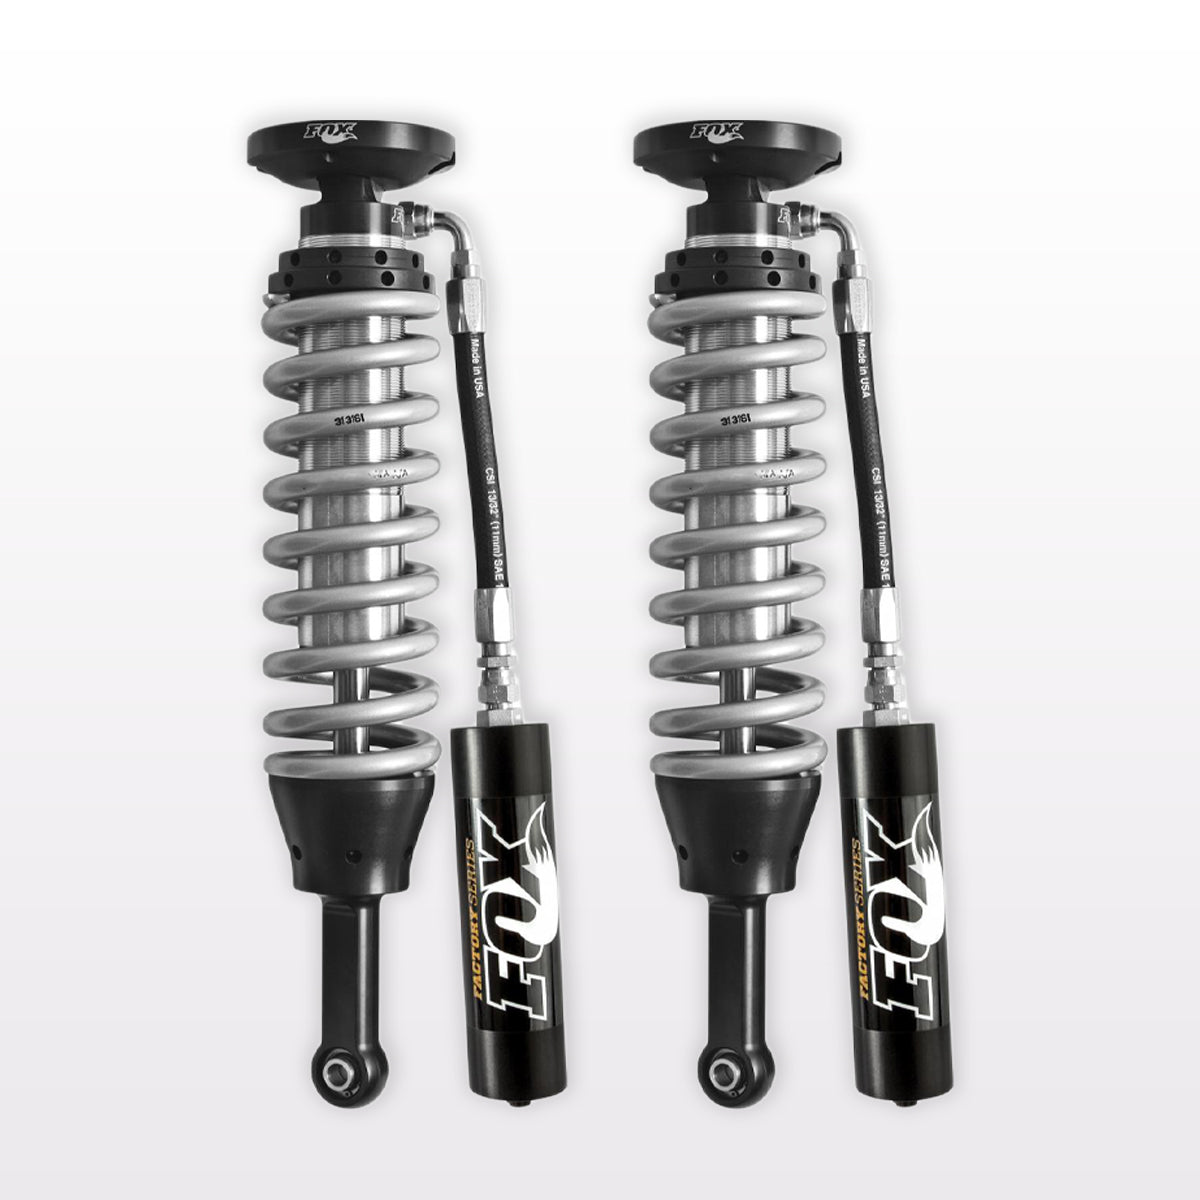 '07-21 Toyota Tundra Fox Factory Race Series 2.5 RR Coilovers & 2.5 Rear Shocks display